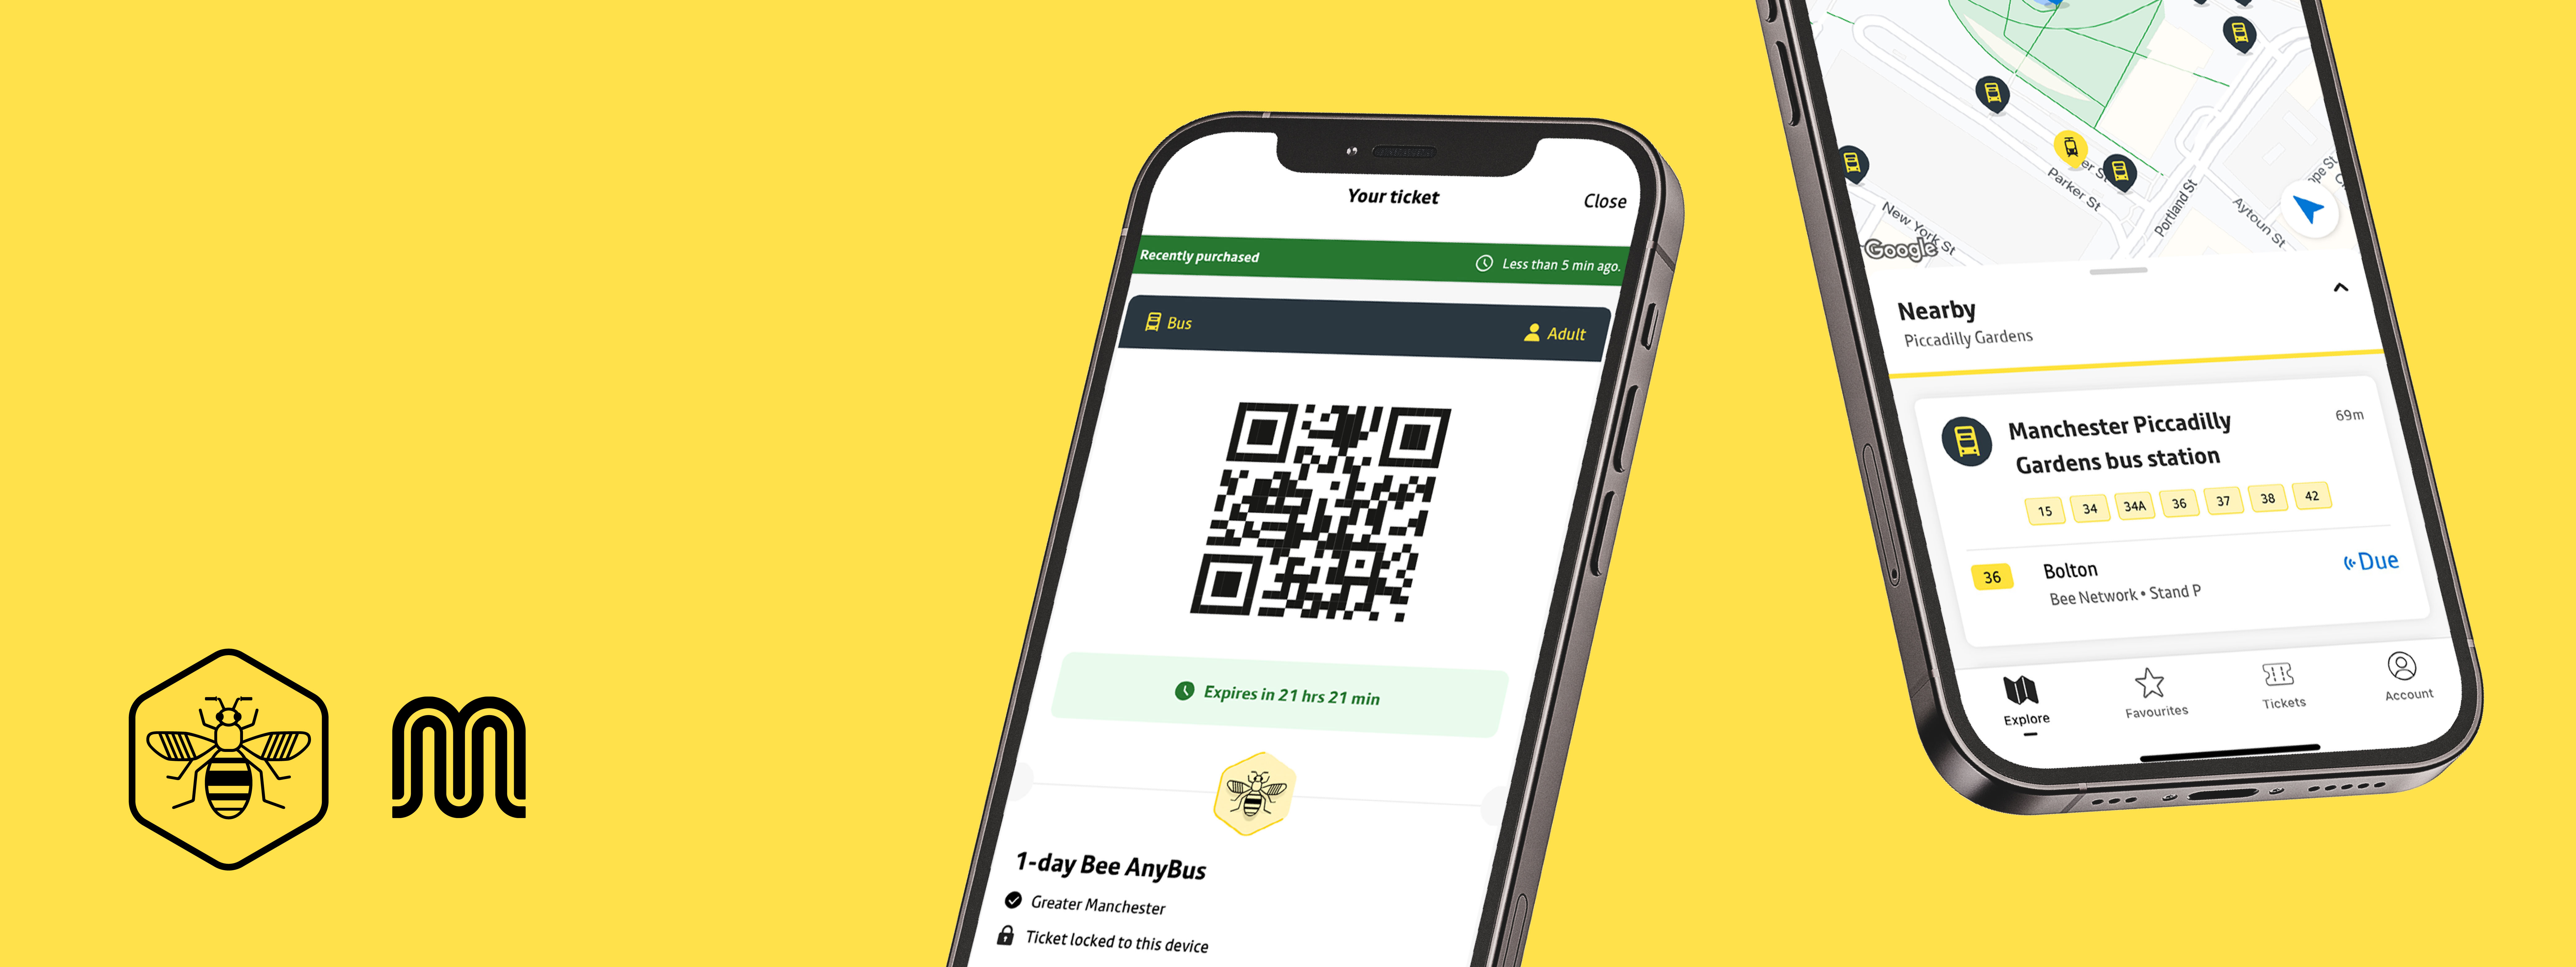 Two screenshots showing the bee network mobile app